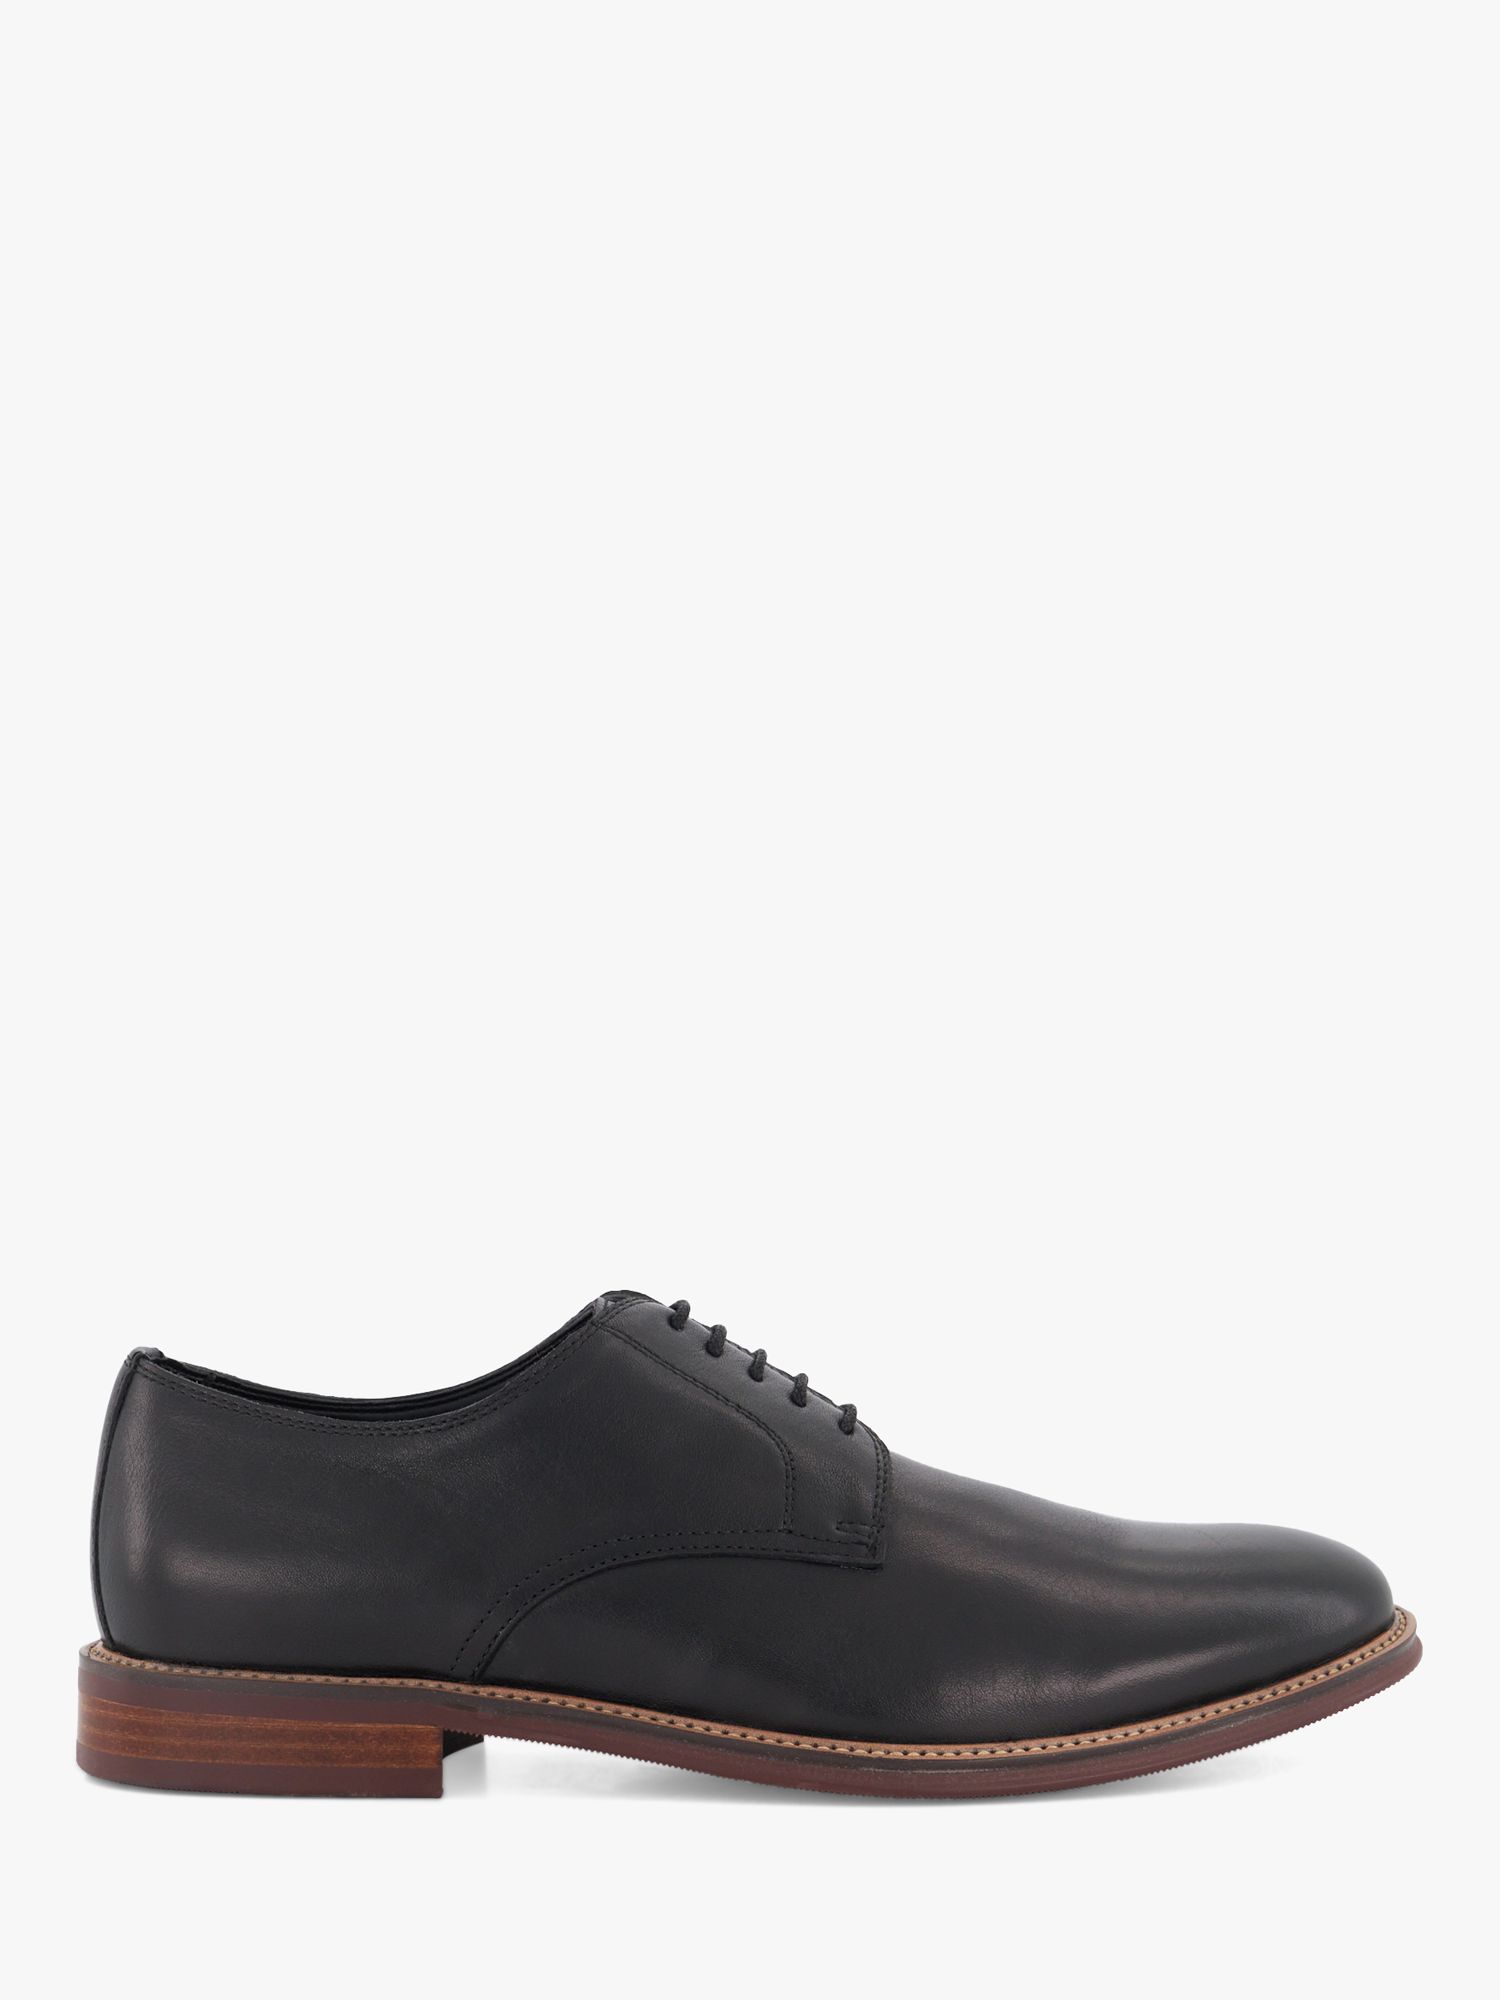 Dune Wide Fit Stanley Leather Lace-Up Shoes, Black, 9